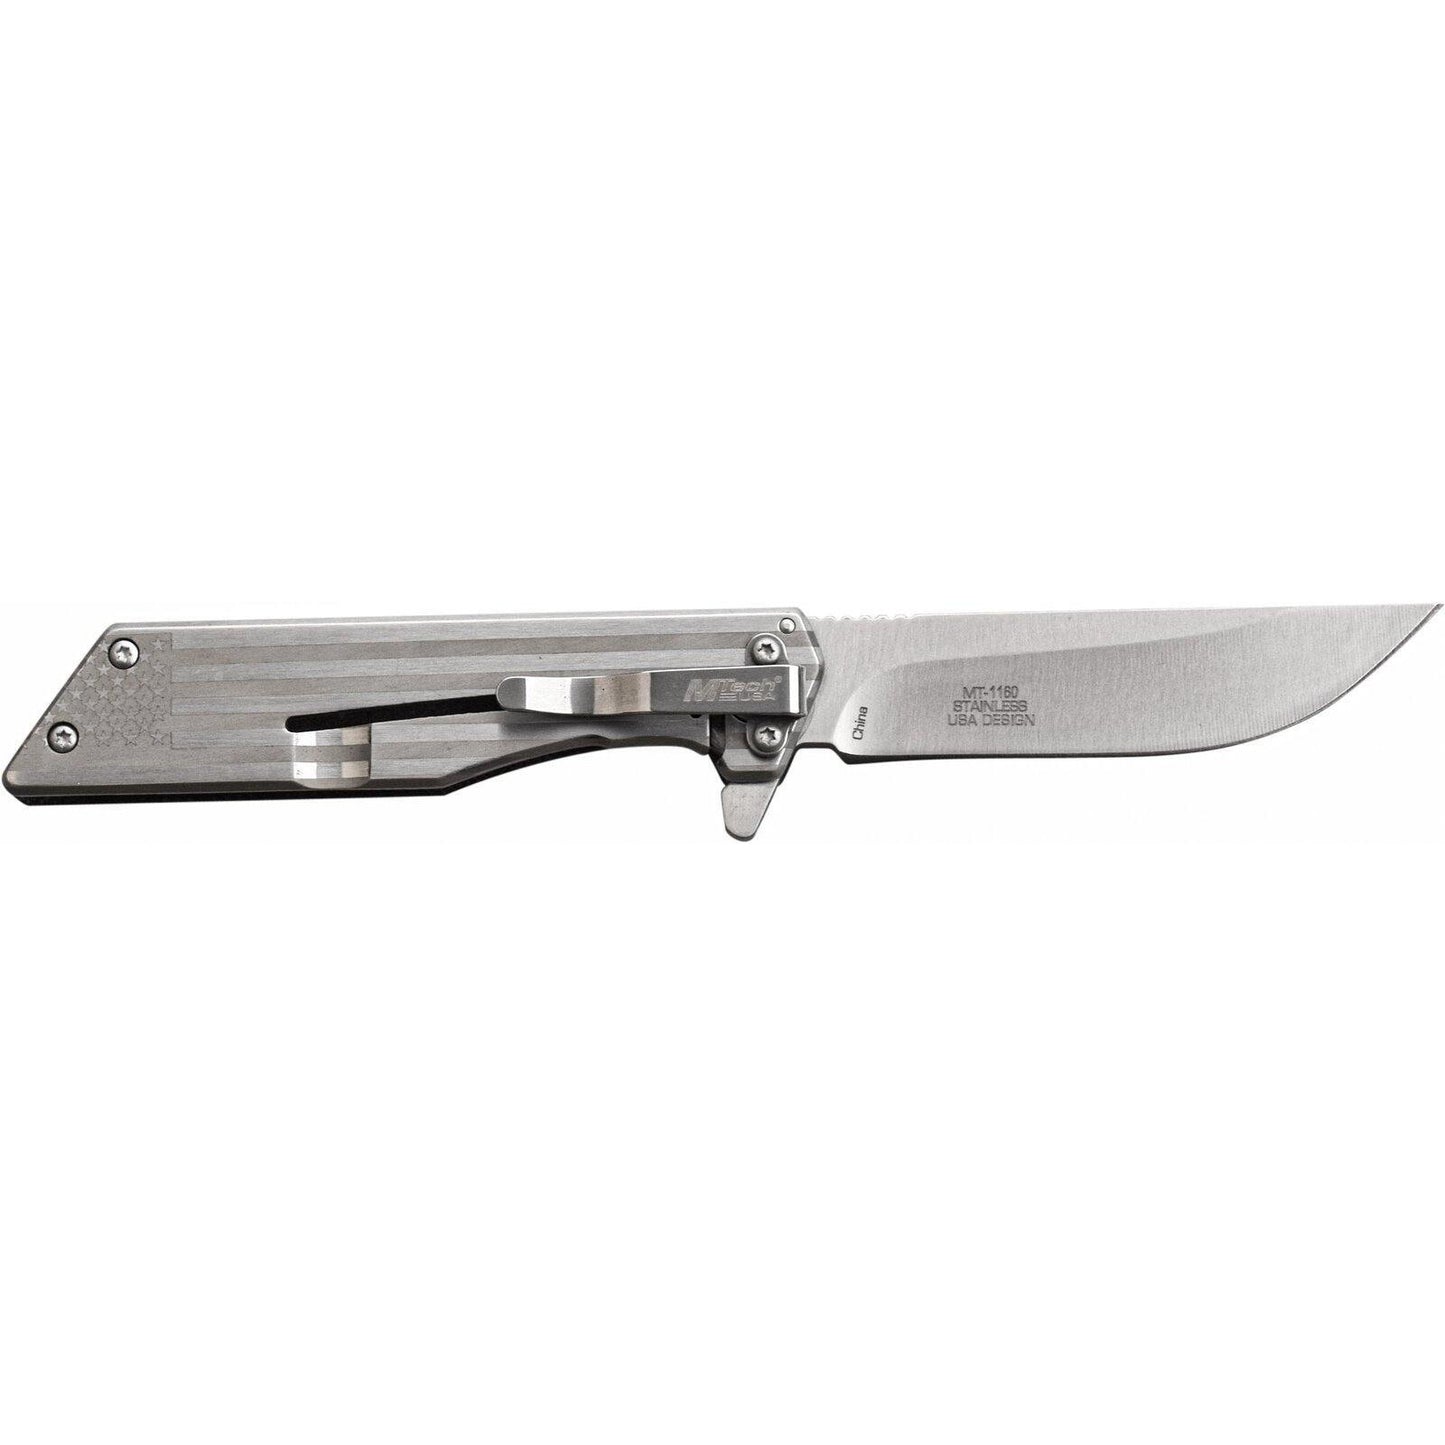 Mtech Drop Point Fine Edge Blade Folding Knife - 7 Inches Overall #mt-1160Lf - Xhunter New Zealand